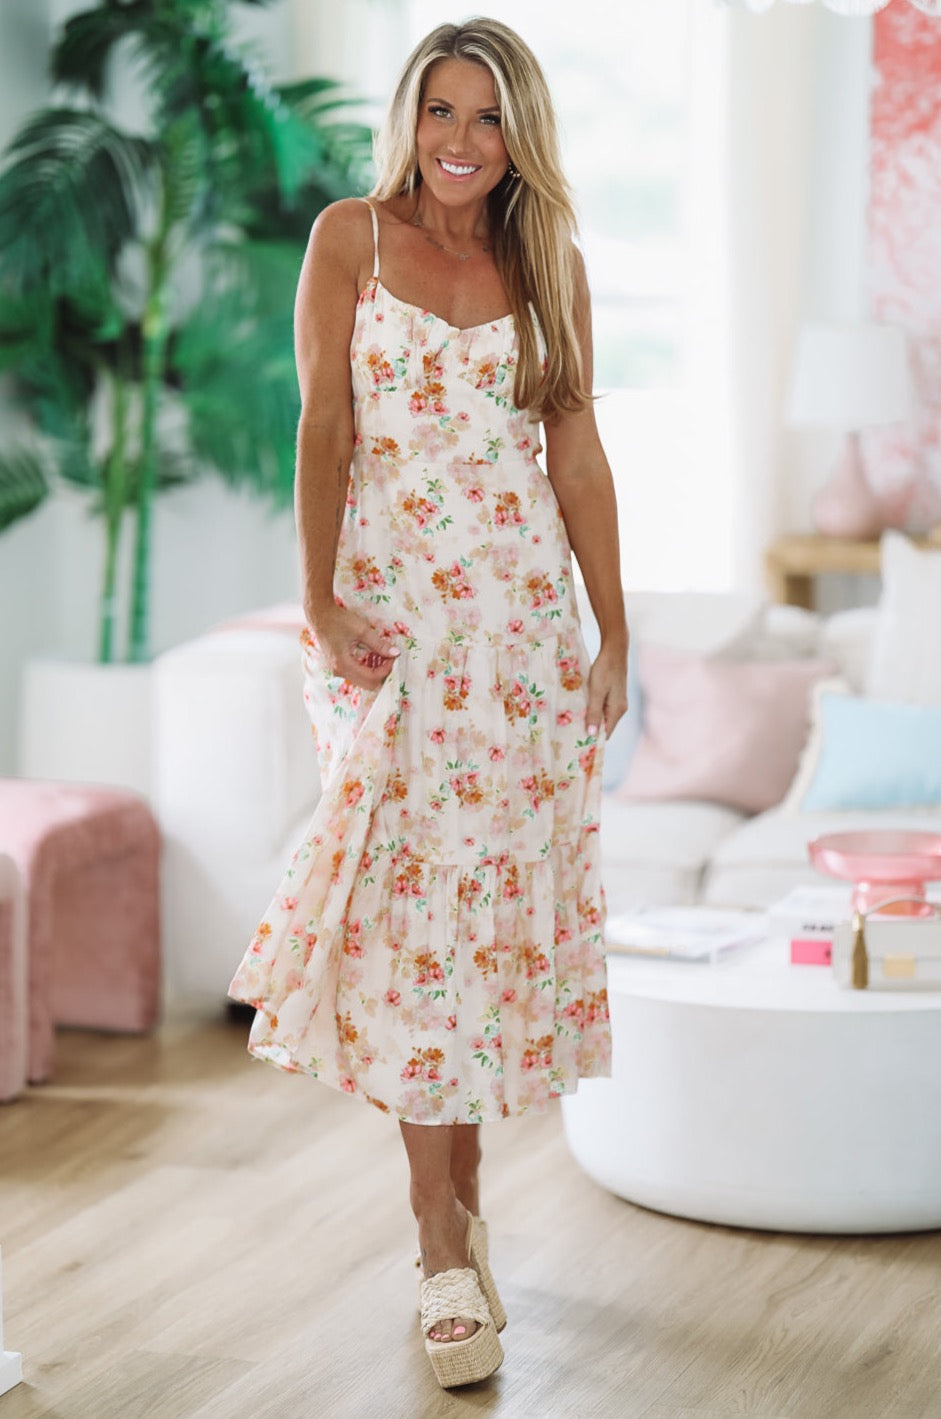 More Than Words Maxi Dress - Cream and Pink